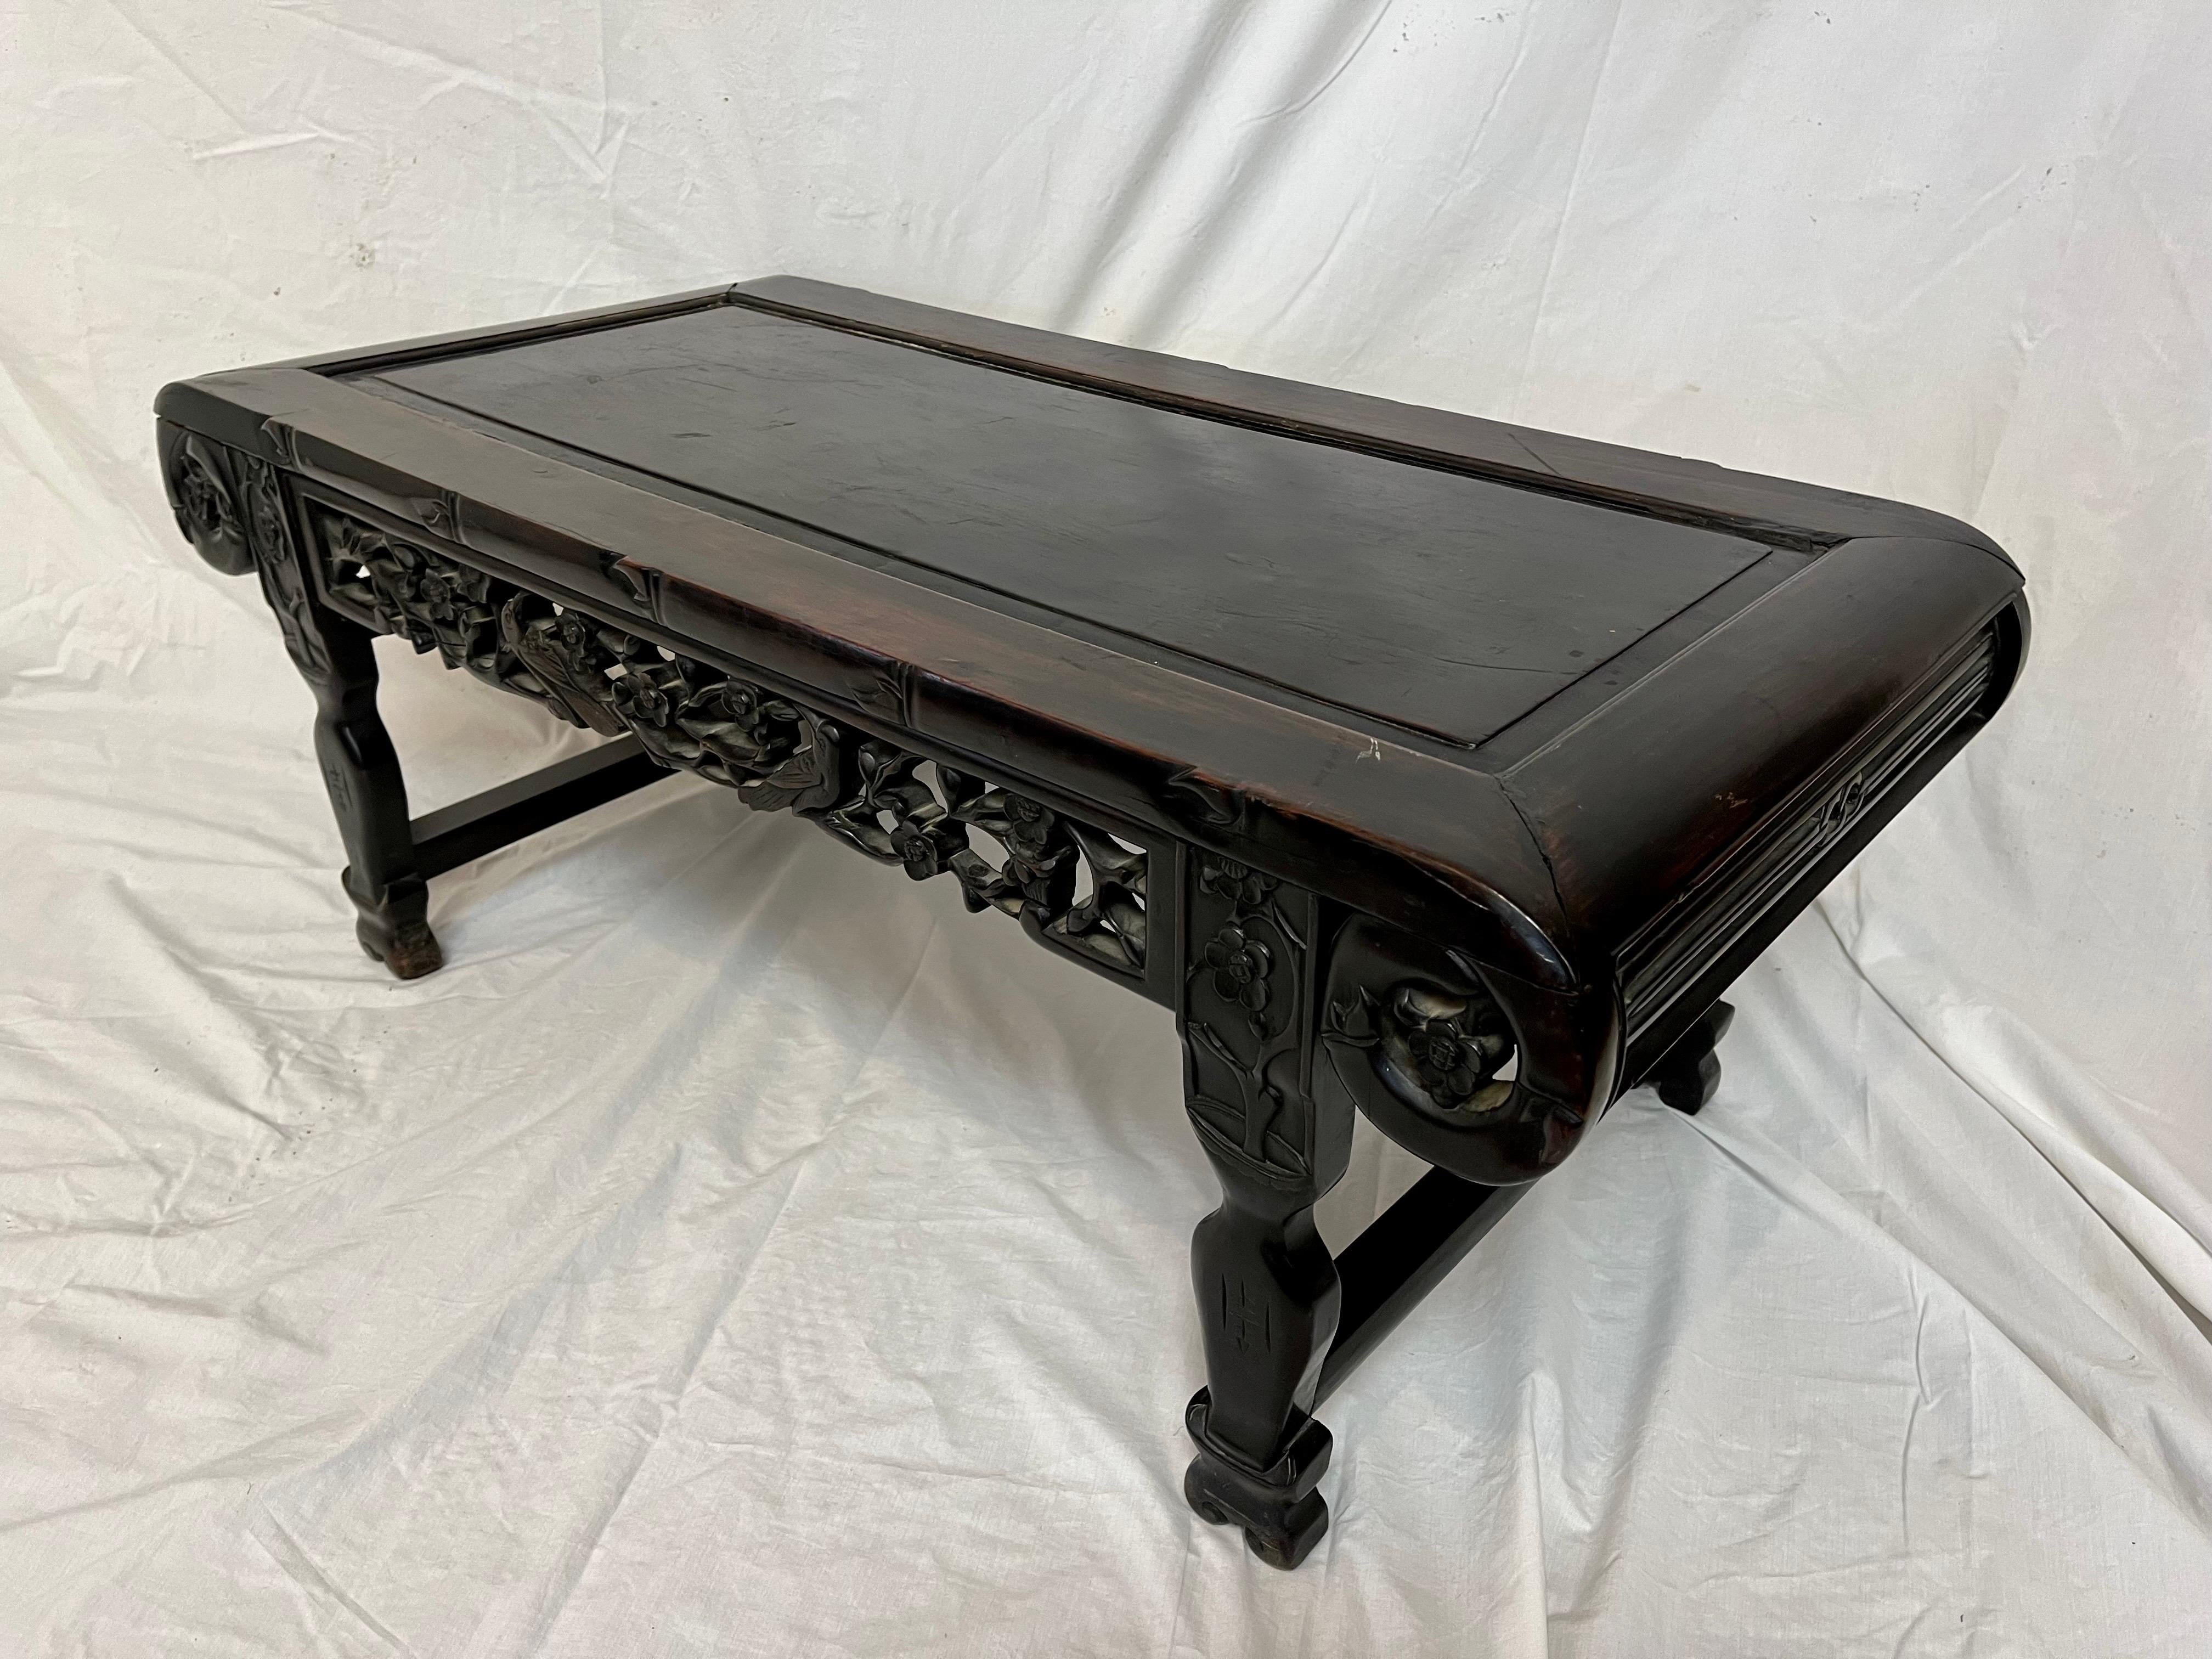 20th Century Asian Antique Carved and Pierced Fretwork Rounded Corners Low or Coffee Table